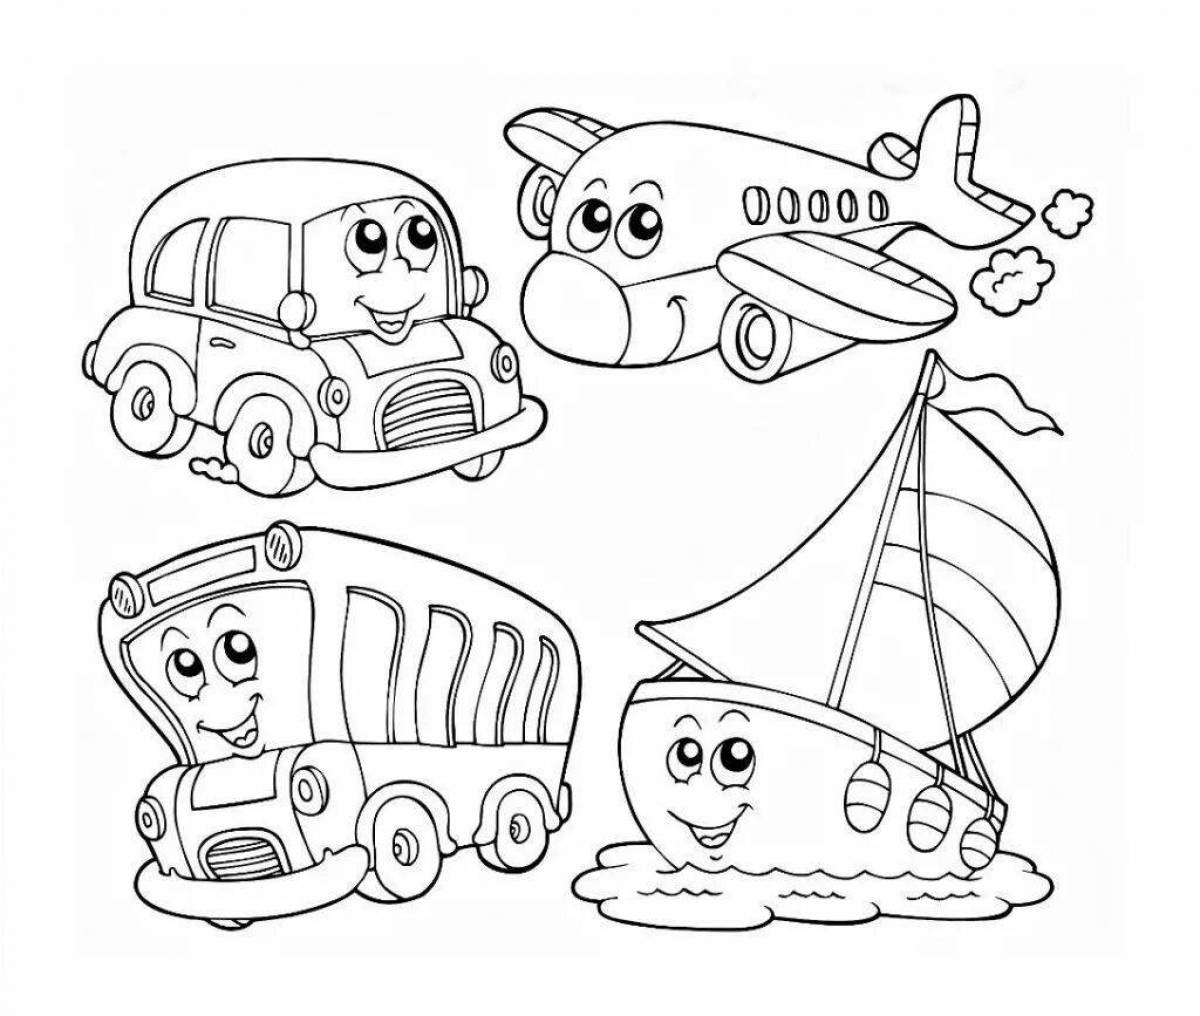 Creative hobbyline coloring page